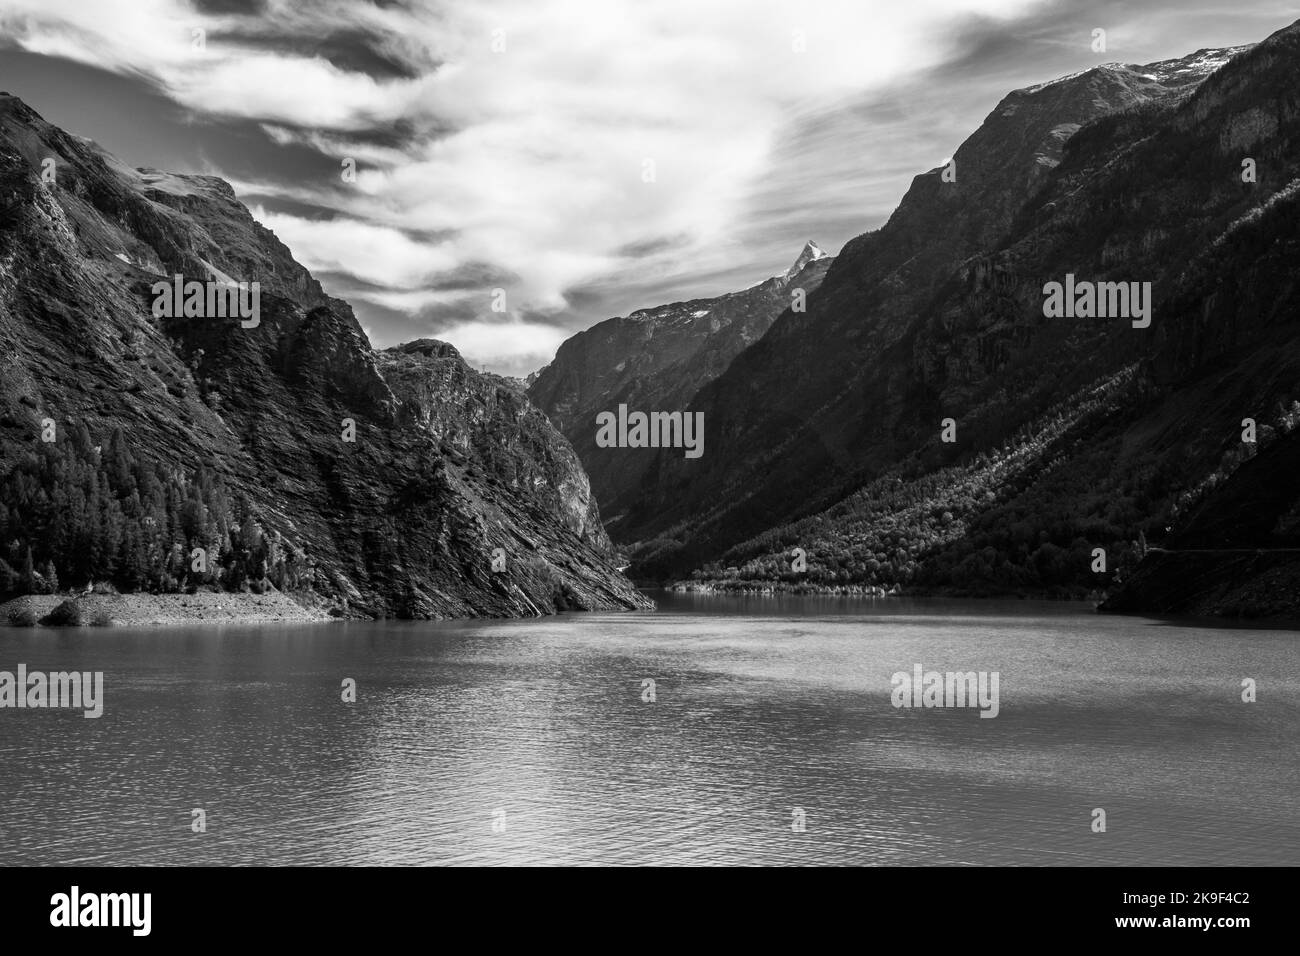 Lake and Mountain in the Alps in the past. Reminiscing the younger days hiking in the Alps in black and white Stock Photo